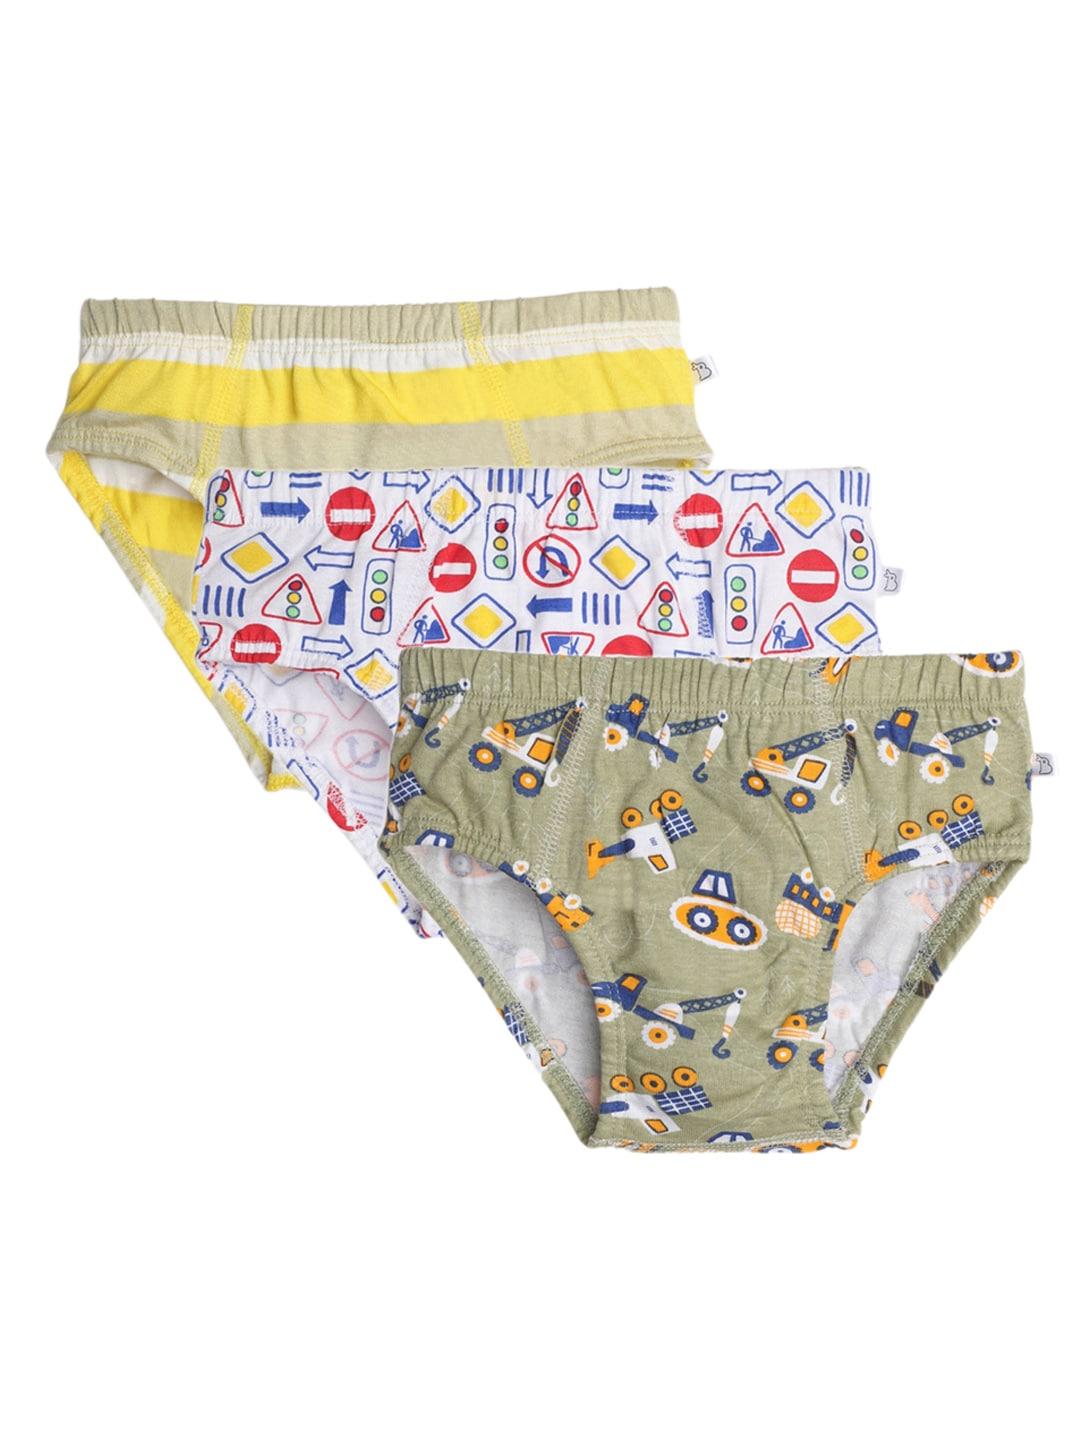 SuperBottoms Boys Pack of 3 Printed Briefs